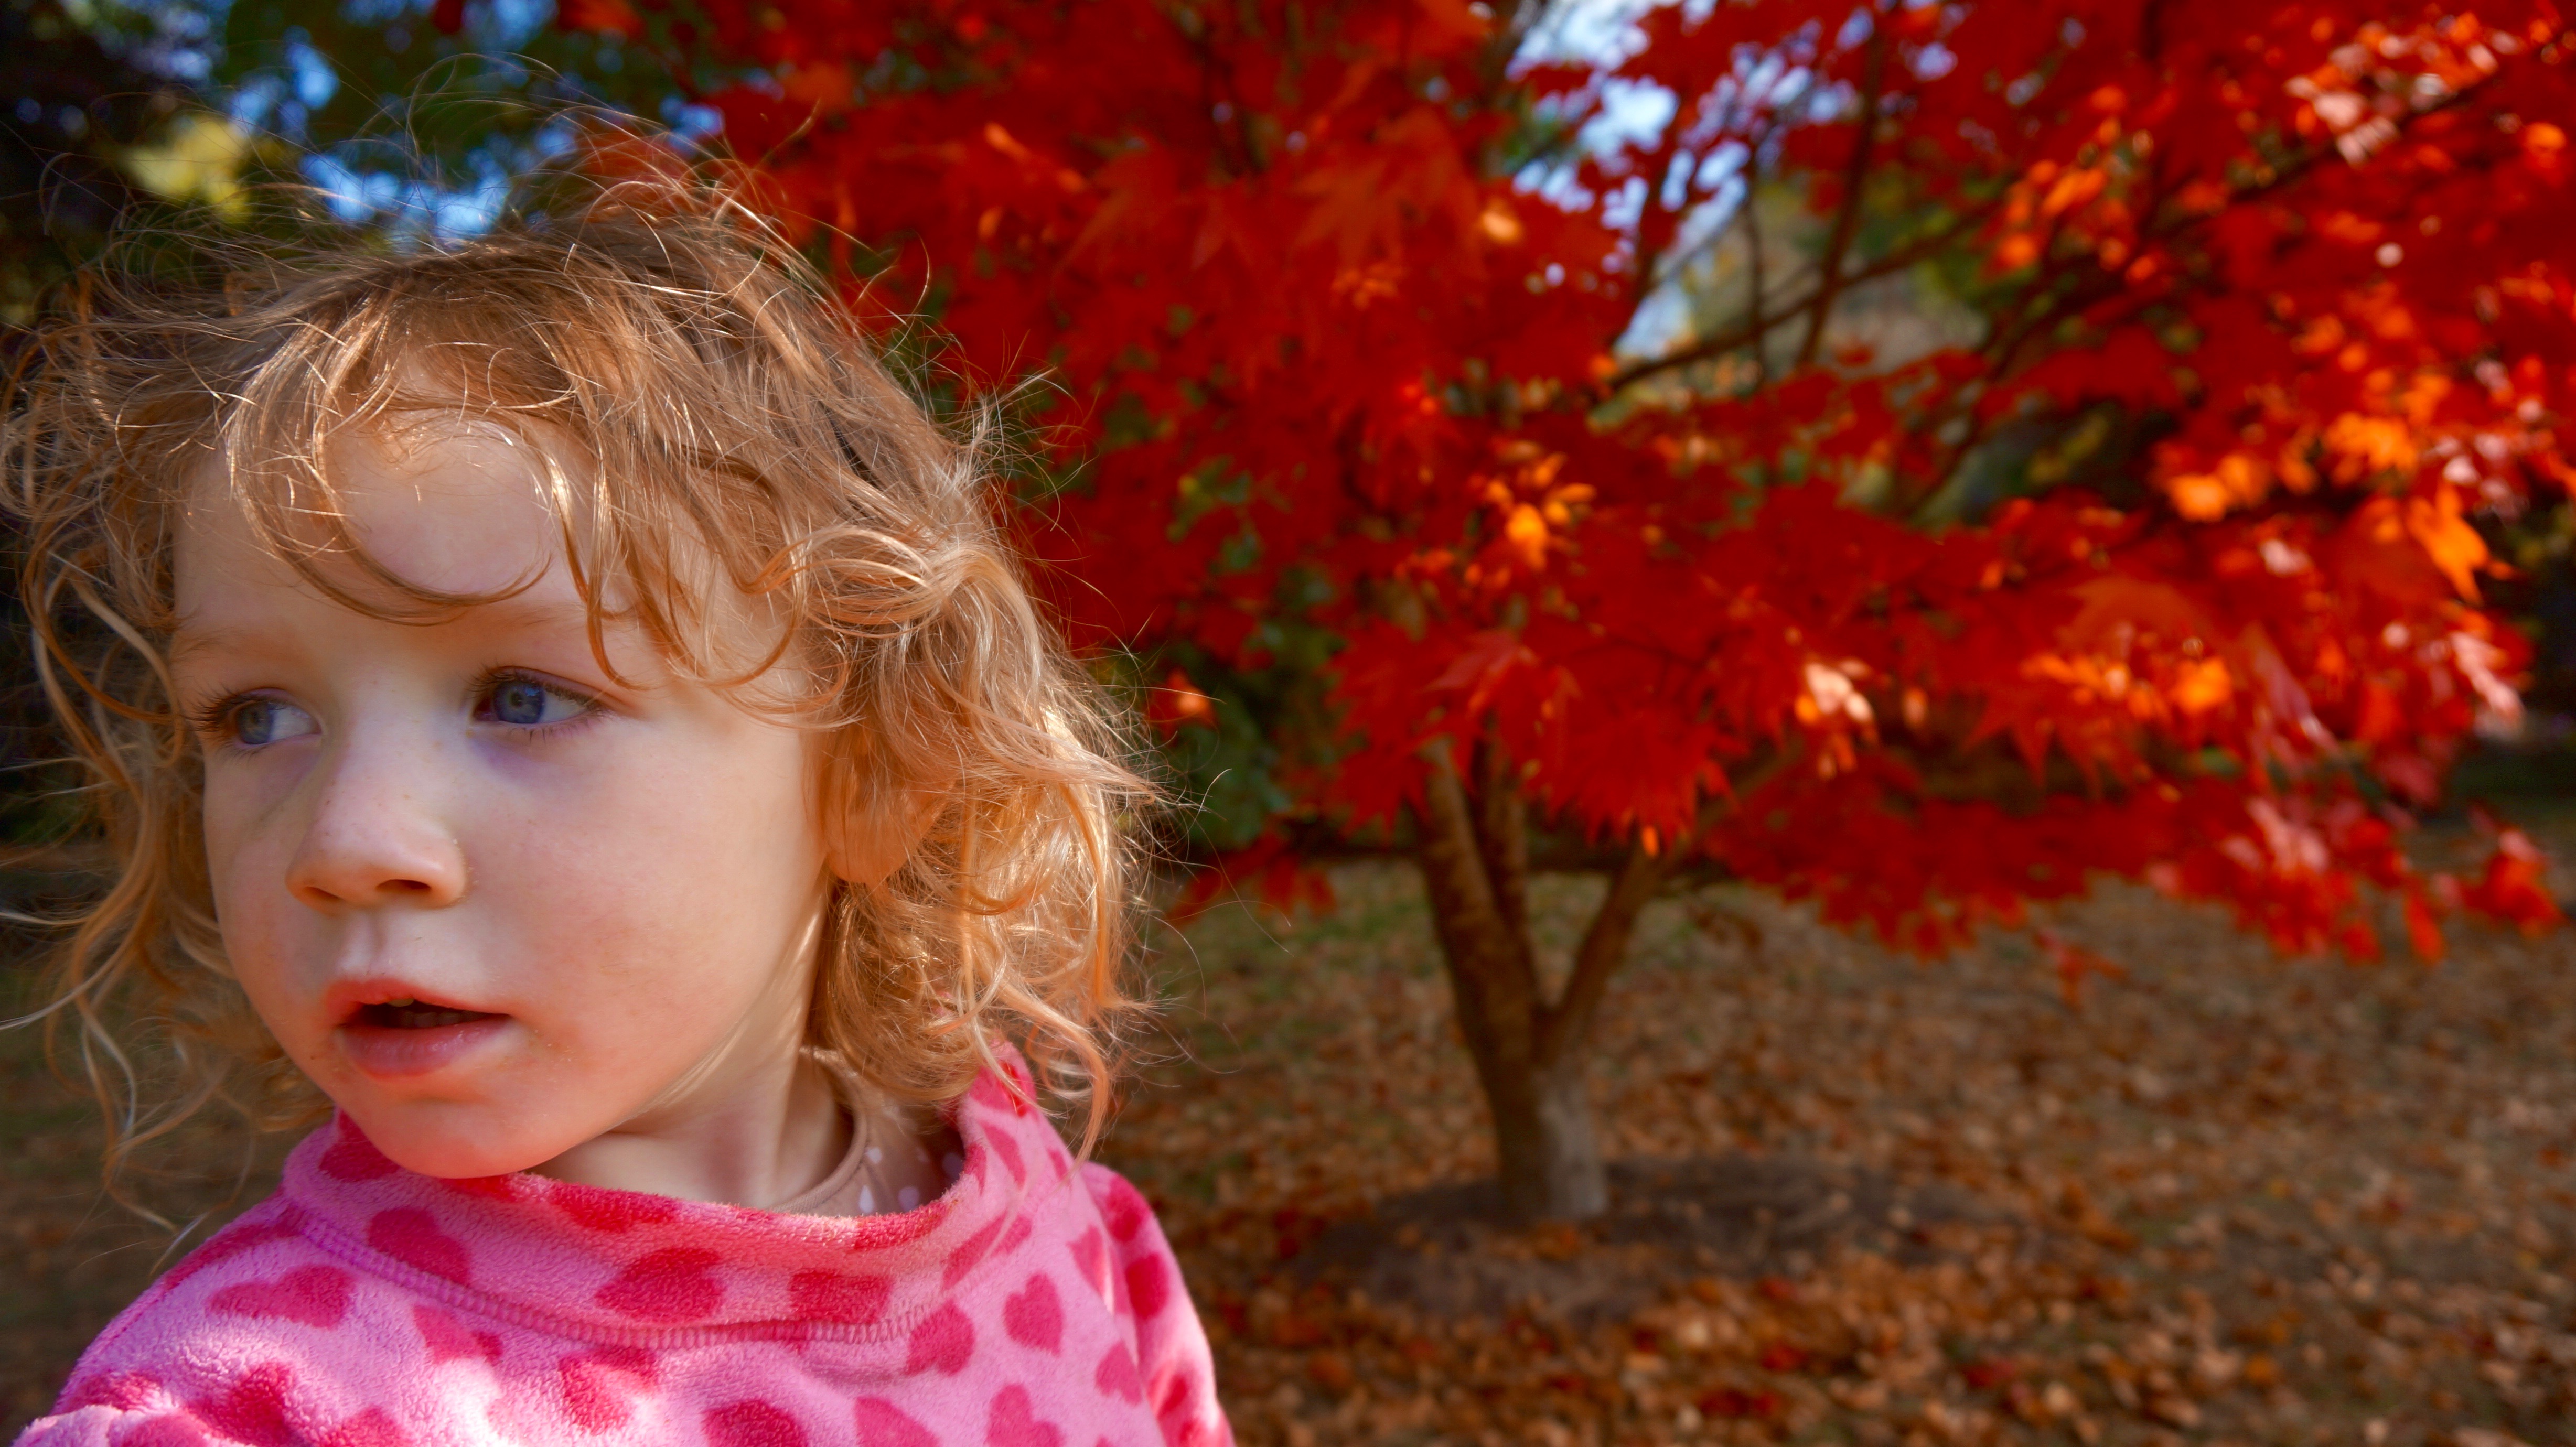 image of child in Autumn when cough remedies are needed